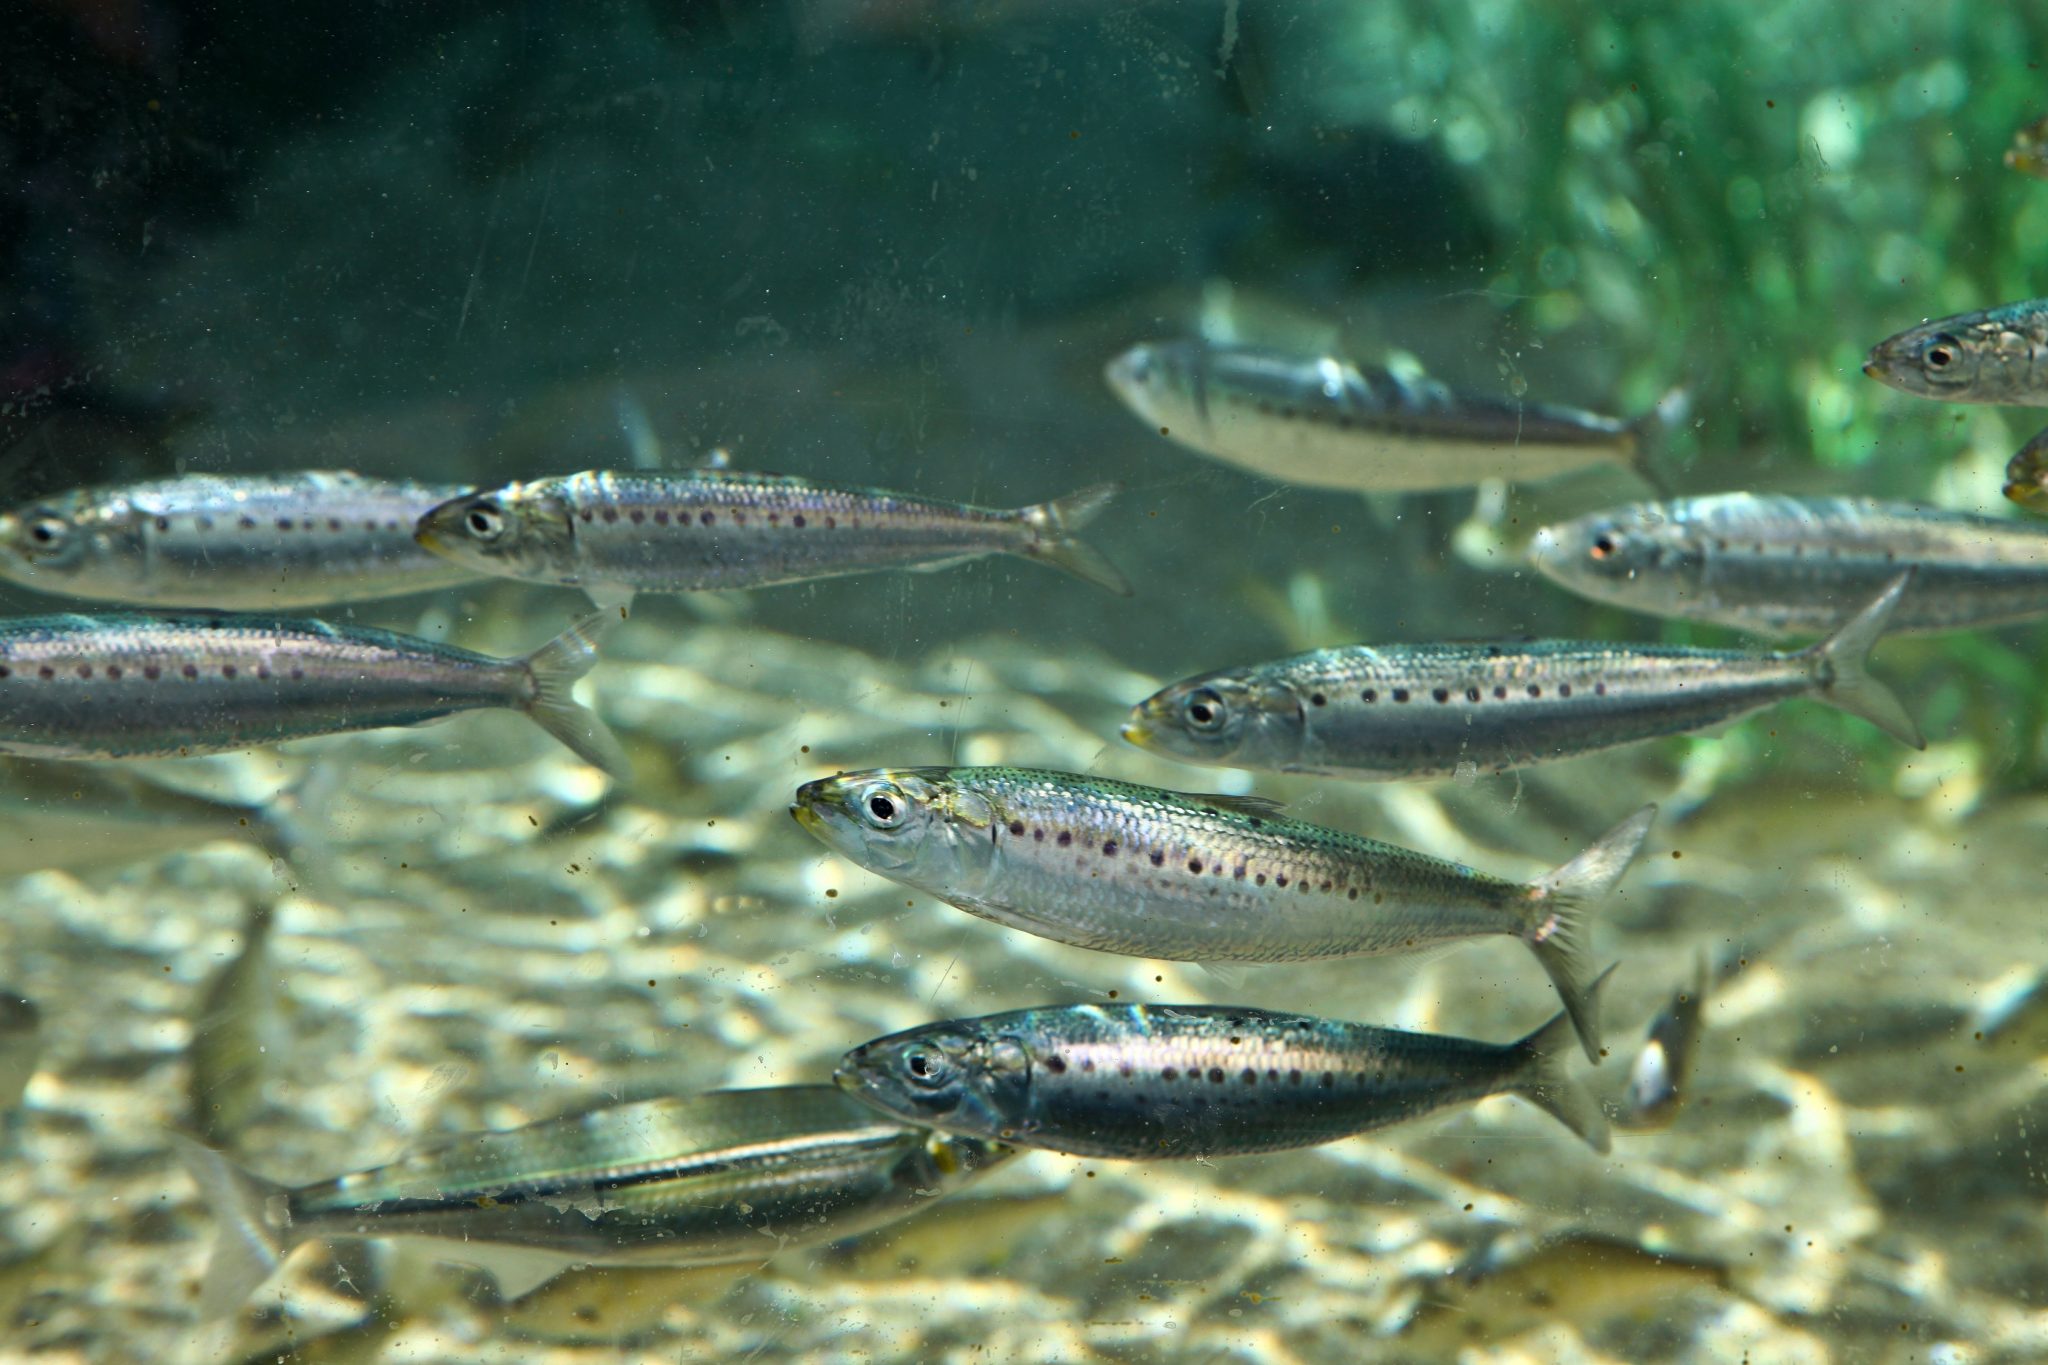 Suppliers for Minnows and Shiners - Alabama Cooperative Extension System